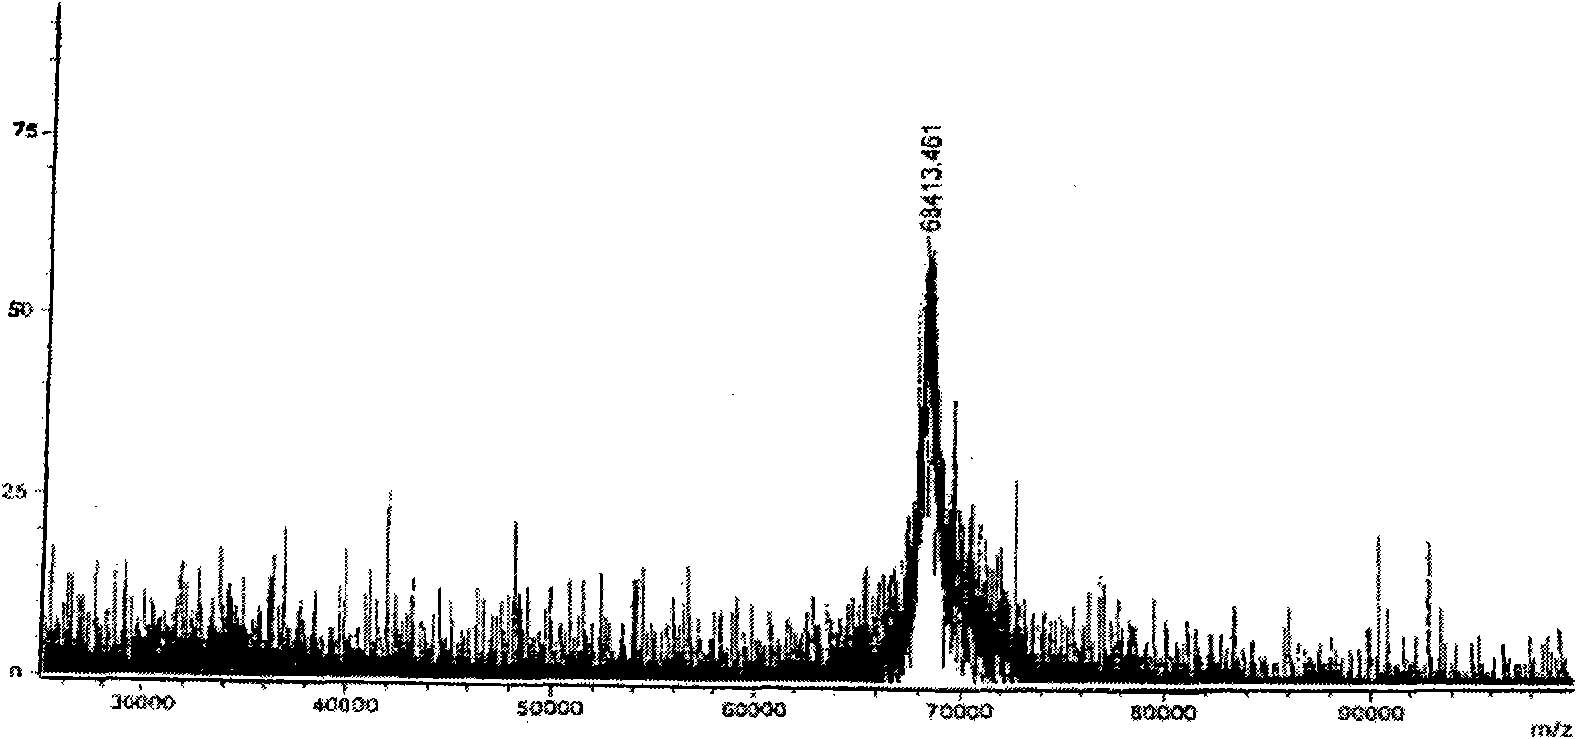 Monoclonal antibody of fluoroquinolone medicines as well as preparation method and application thereof